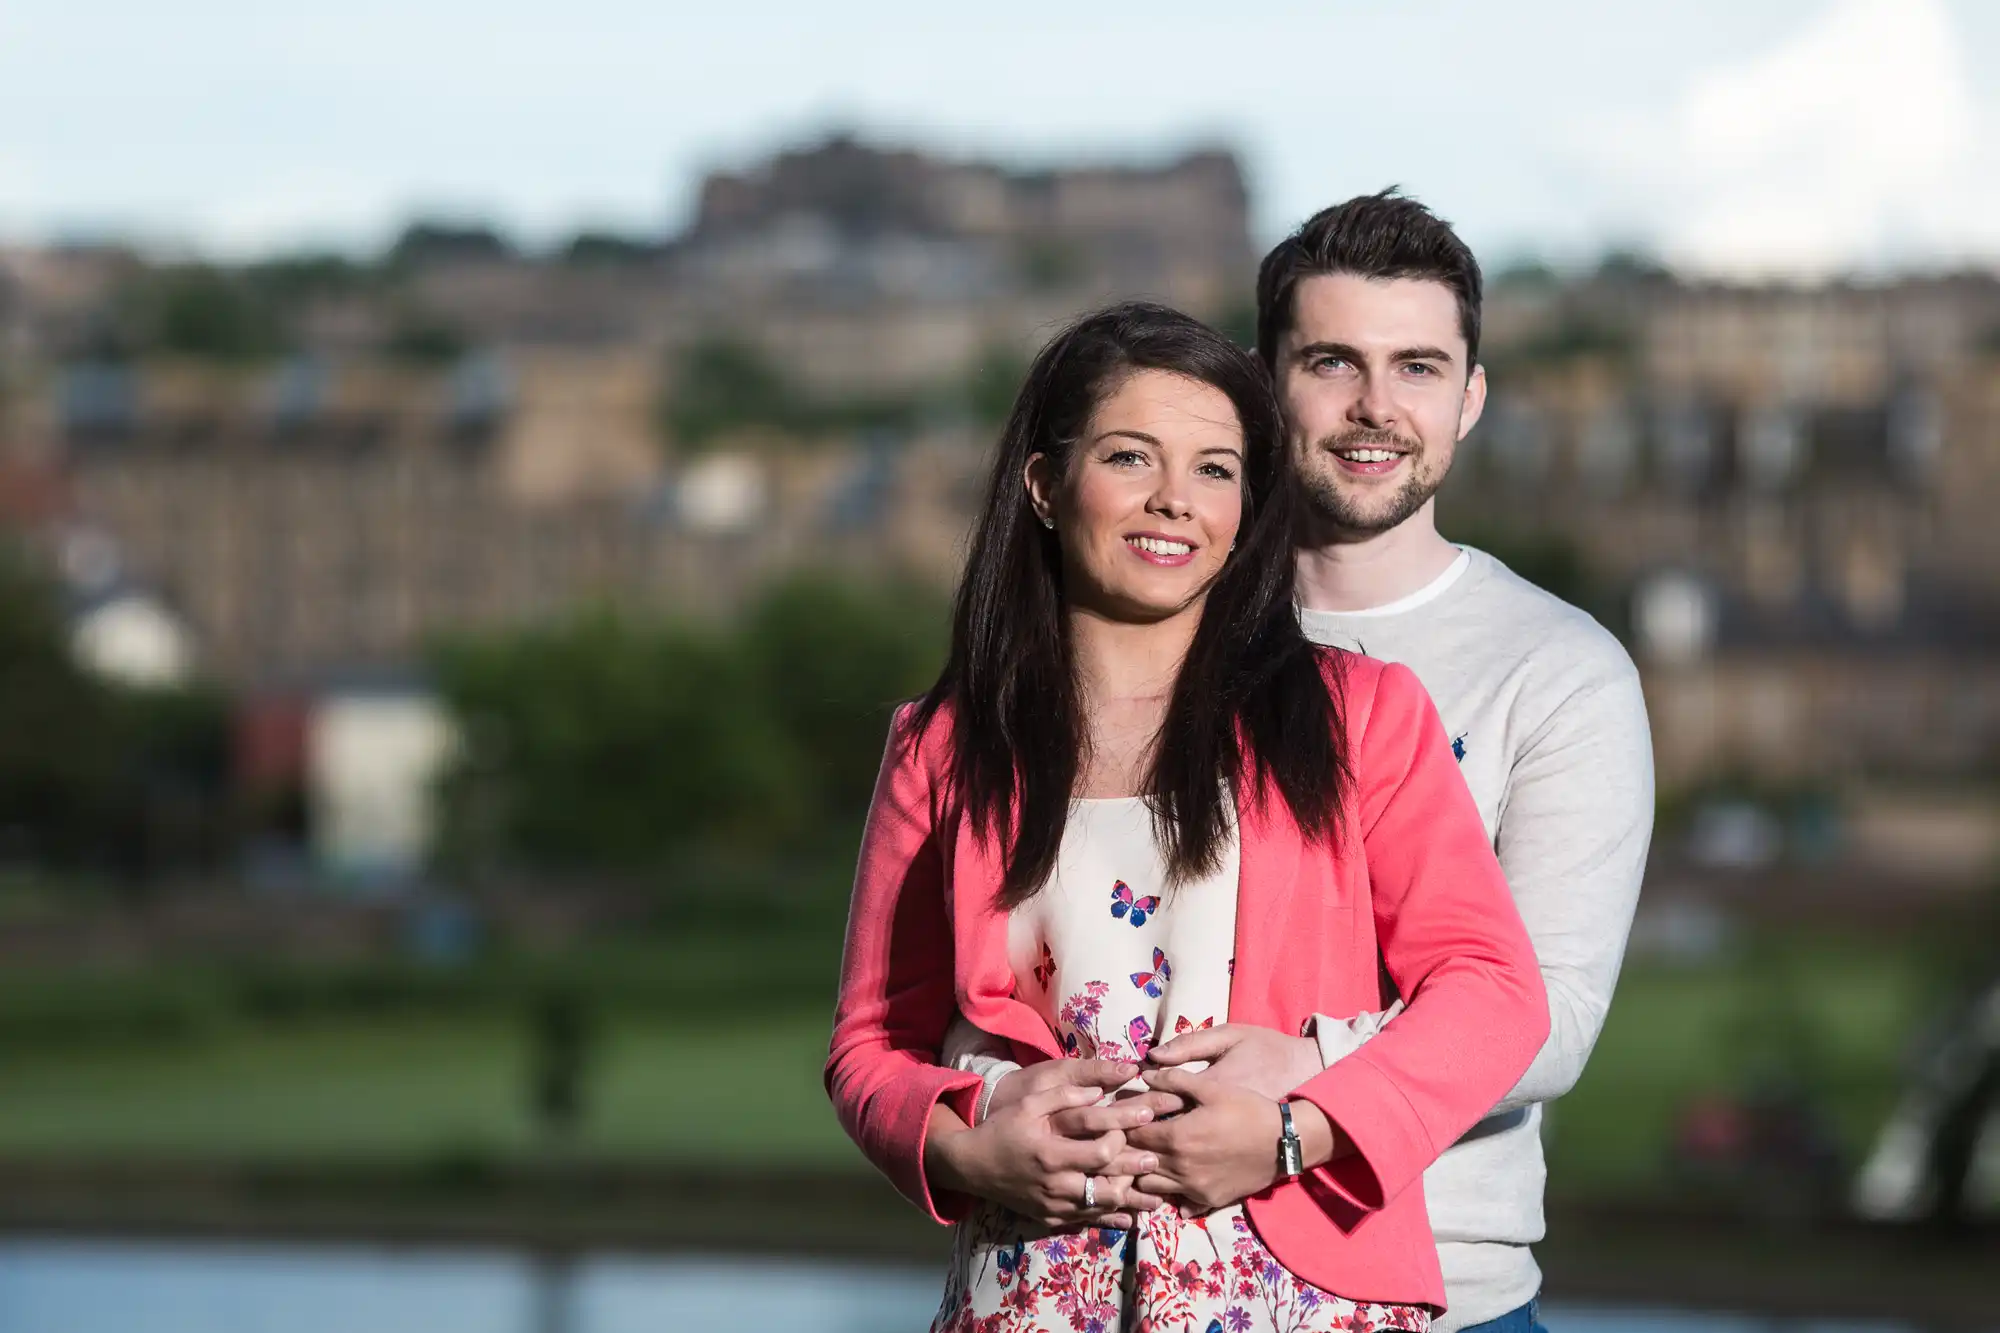 A young couple embracing and smiling outdoors with a blurred cityscape and hilltop castle in the background.